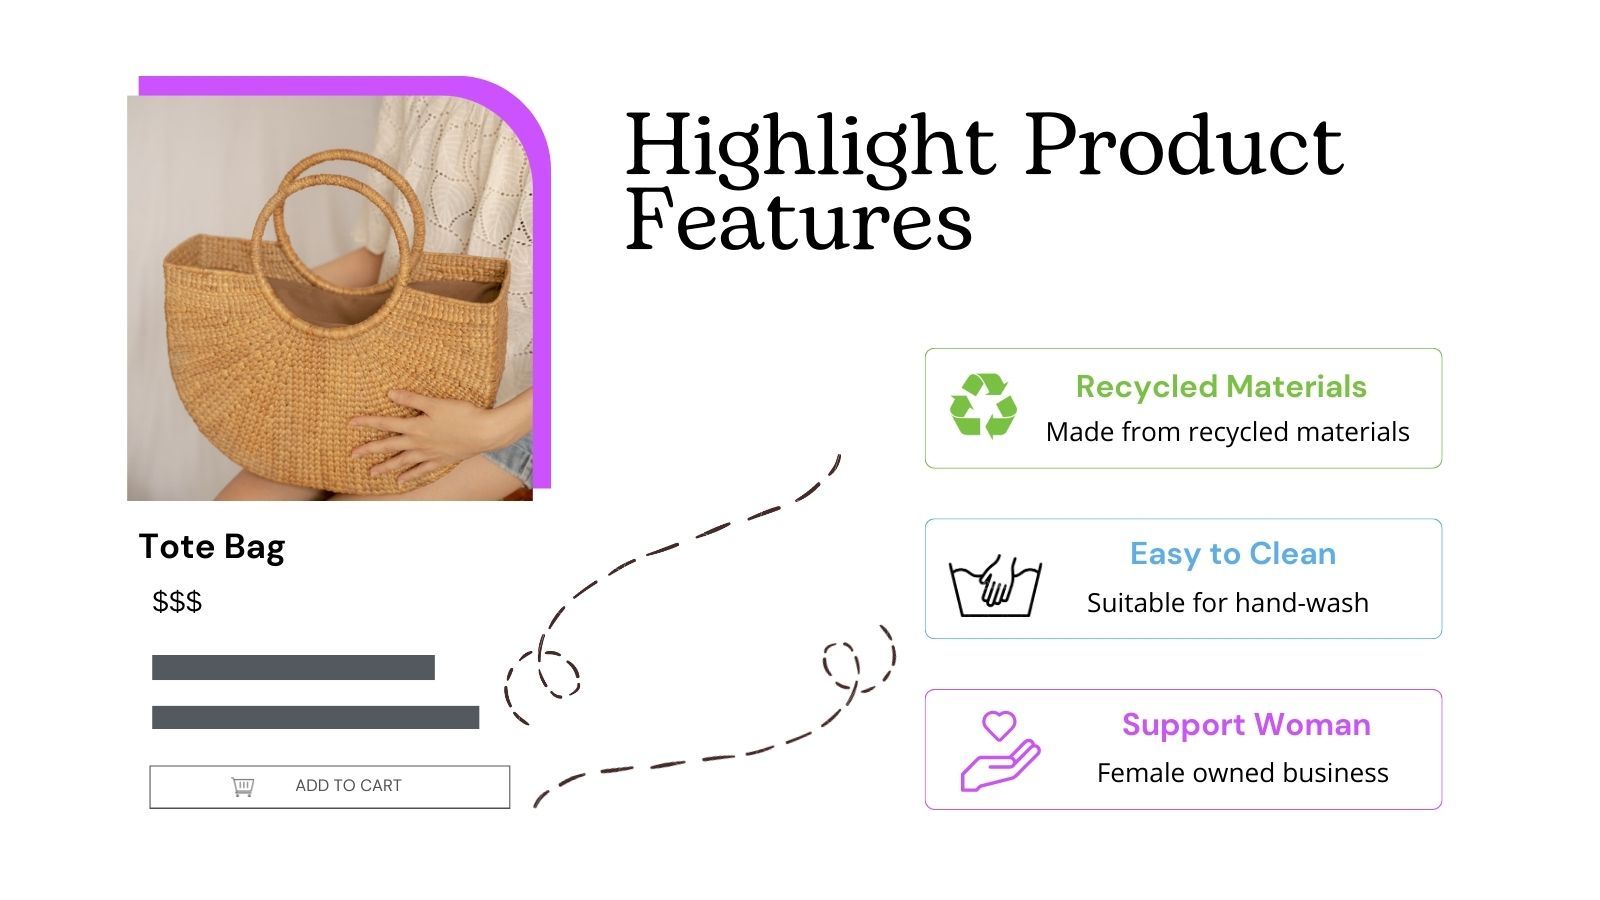 Highlight product features, descriptions, discounts, offers